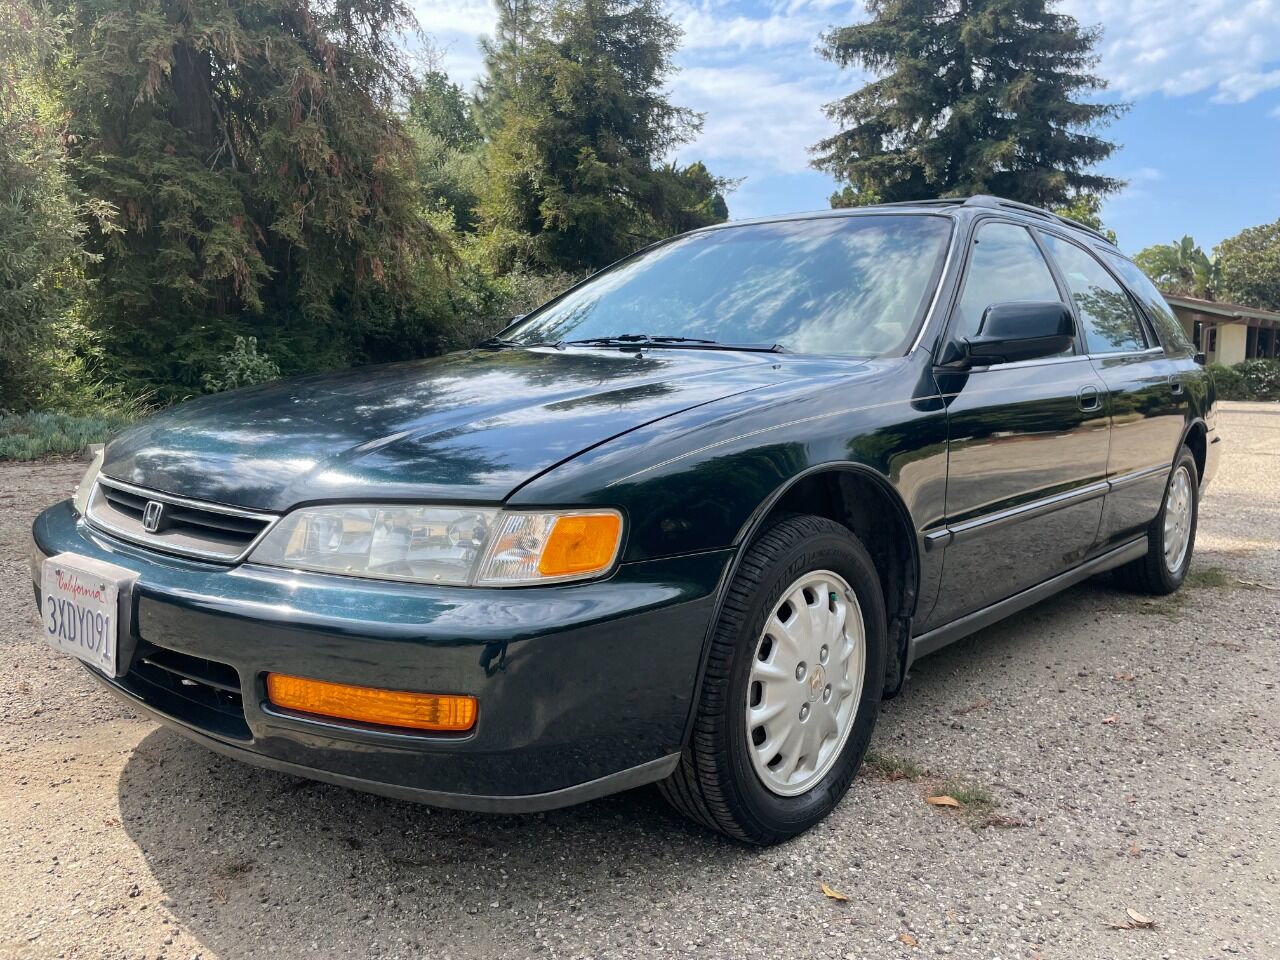 Would You Pay 29997 For This Wicked 1997 Honda Accord Wagon